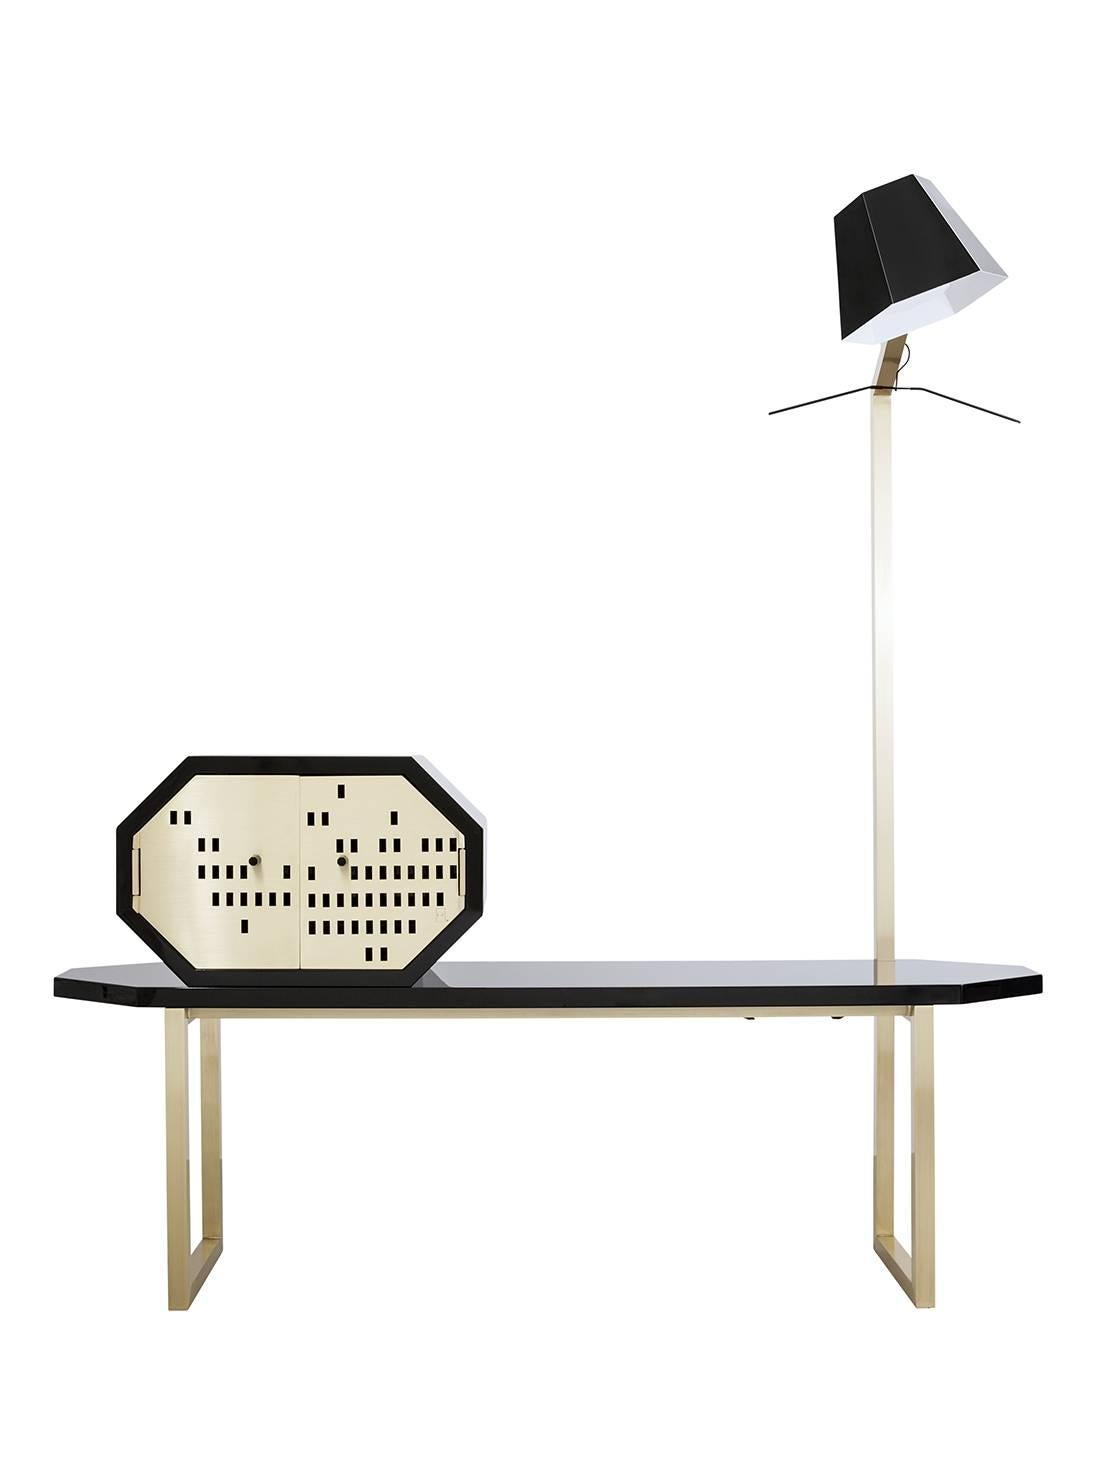 Creating a union of various pieces of furniture in a harmonic way. Mappamondo combines the function of a bench, containers for quick storage, of which one is removable and a standing lamp which is also a coat hanger.
In order to guarantee best